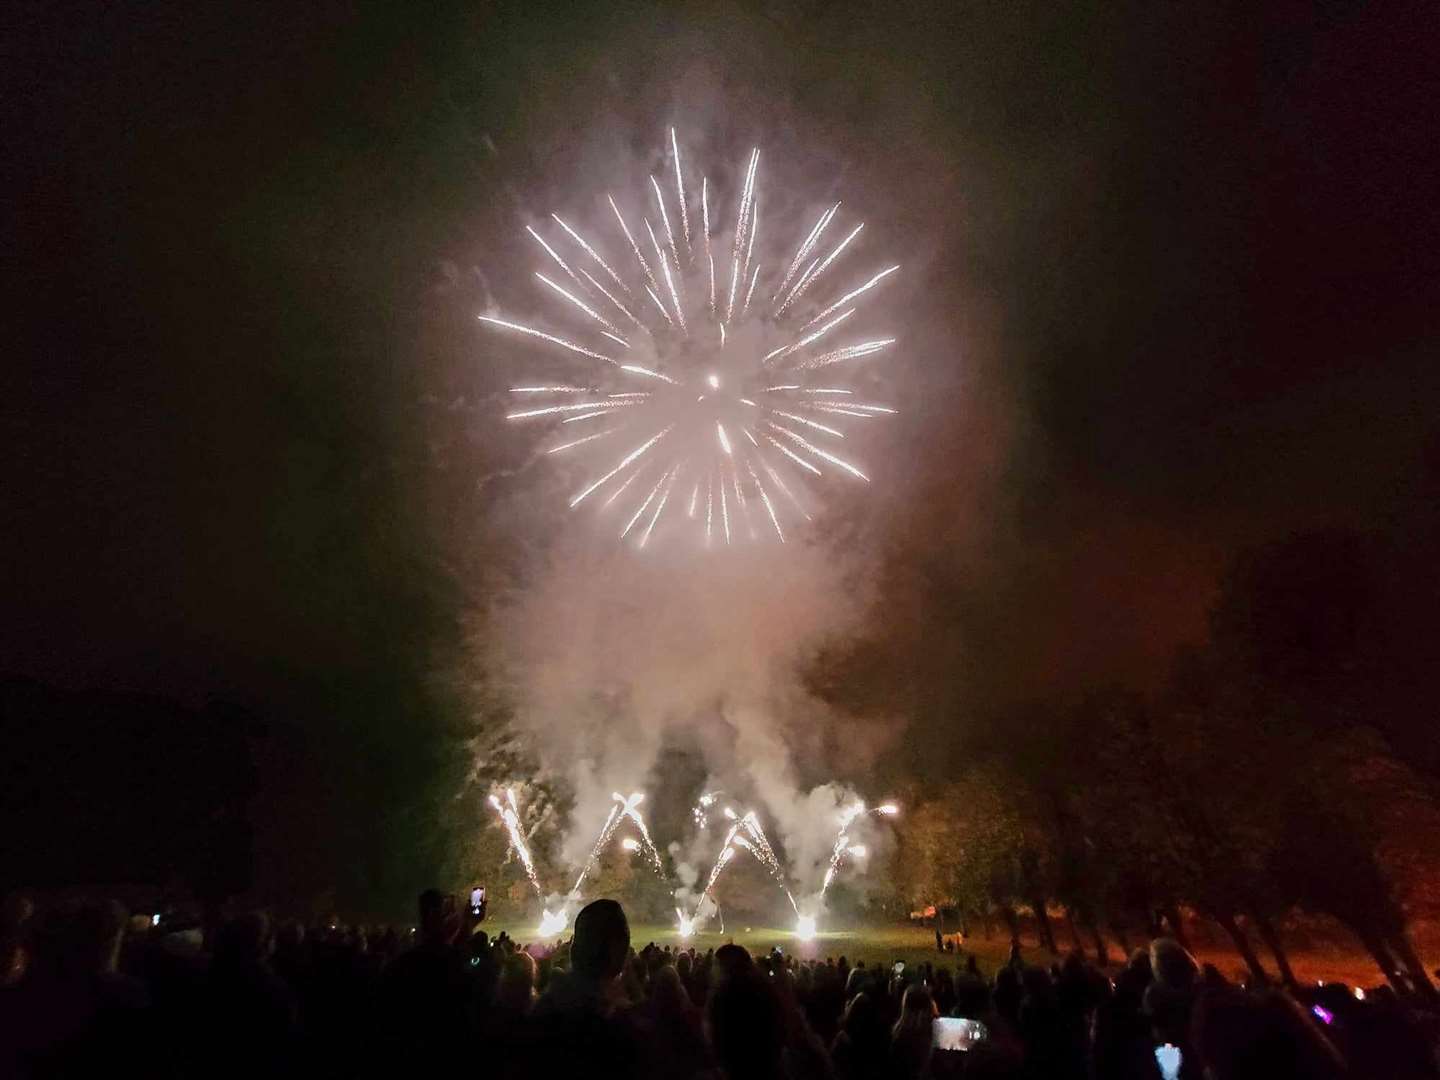 The huge crowd was thrilled by the lights and explosions provided by Fireworx Scotland.